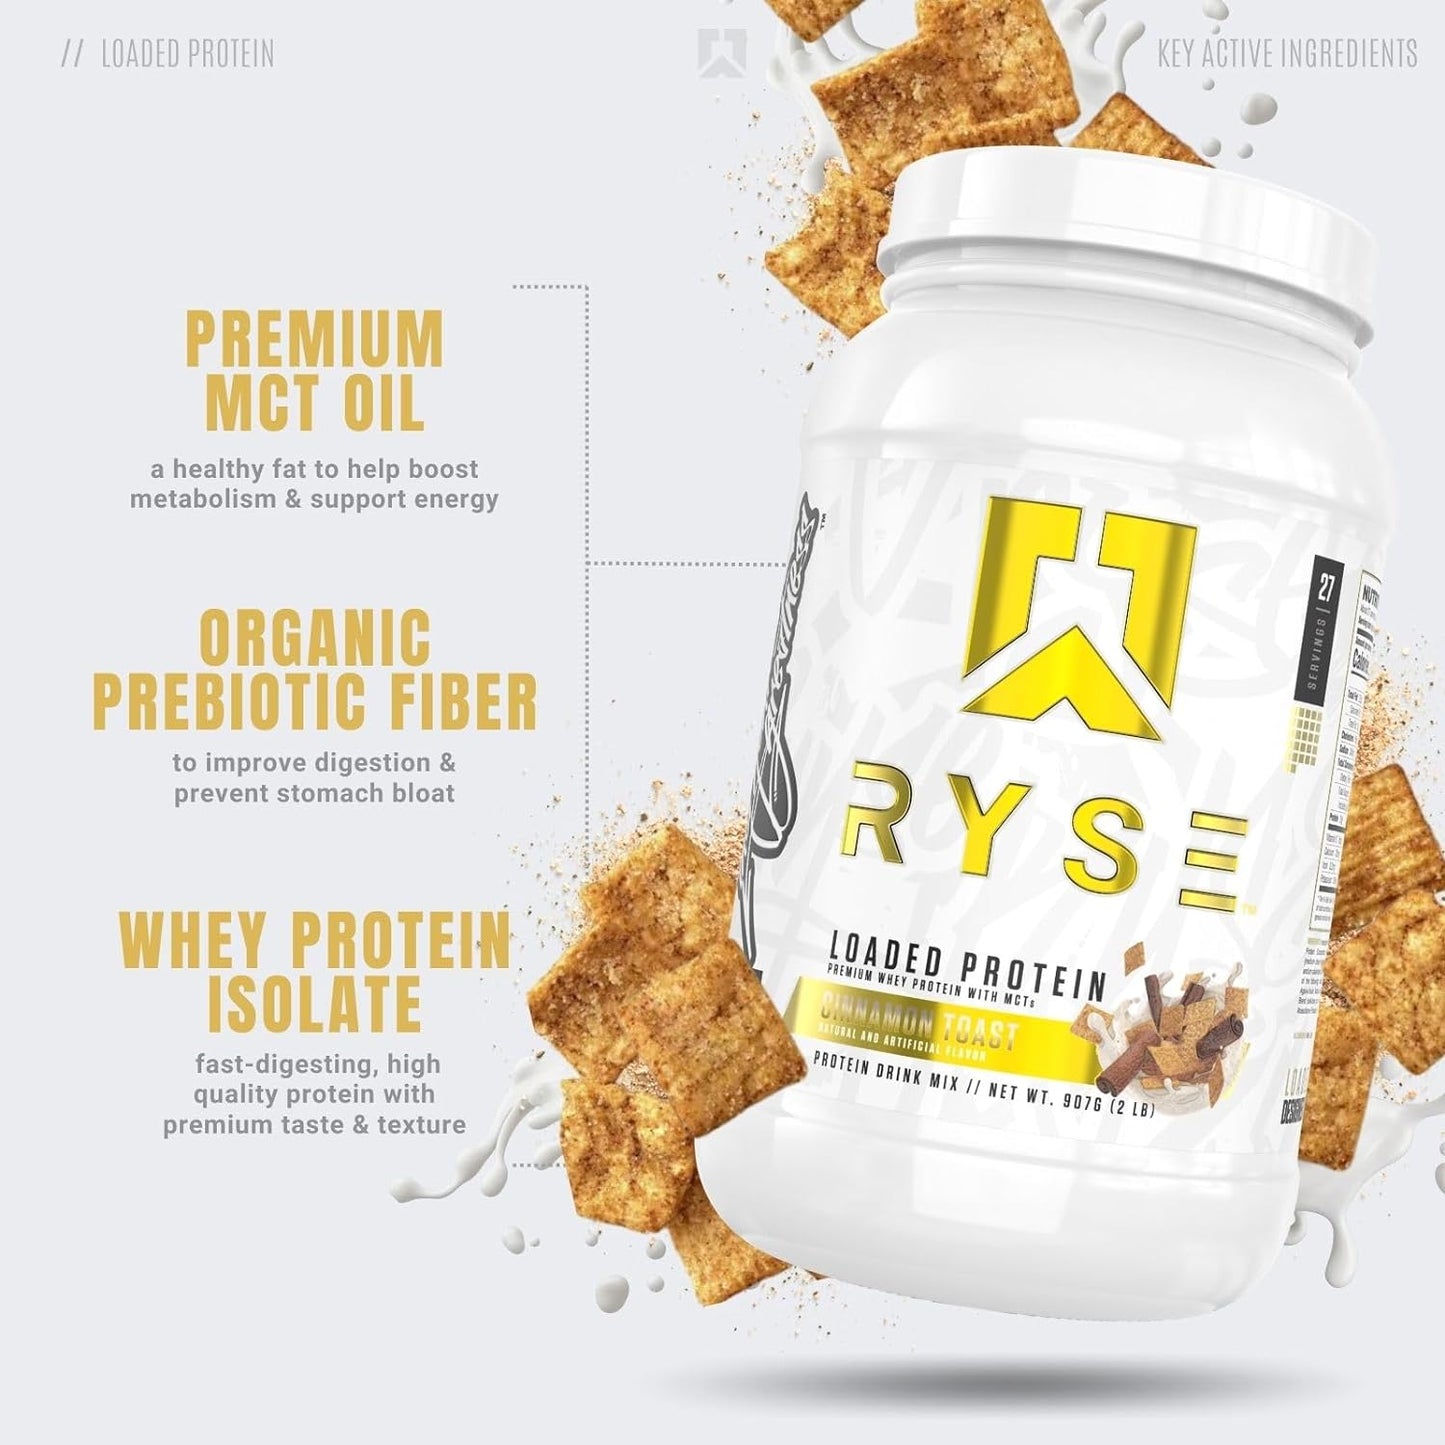 RYSE Up Supplements Loaded Protein Powder | 25g Whey Protein Isolate & Concentrate | with Prebiotic Fiber & MCTs | Low Carbs & Low Sugar | 27 Servings (Cinnamon Toast)